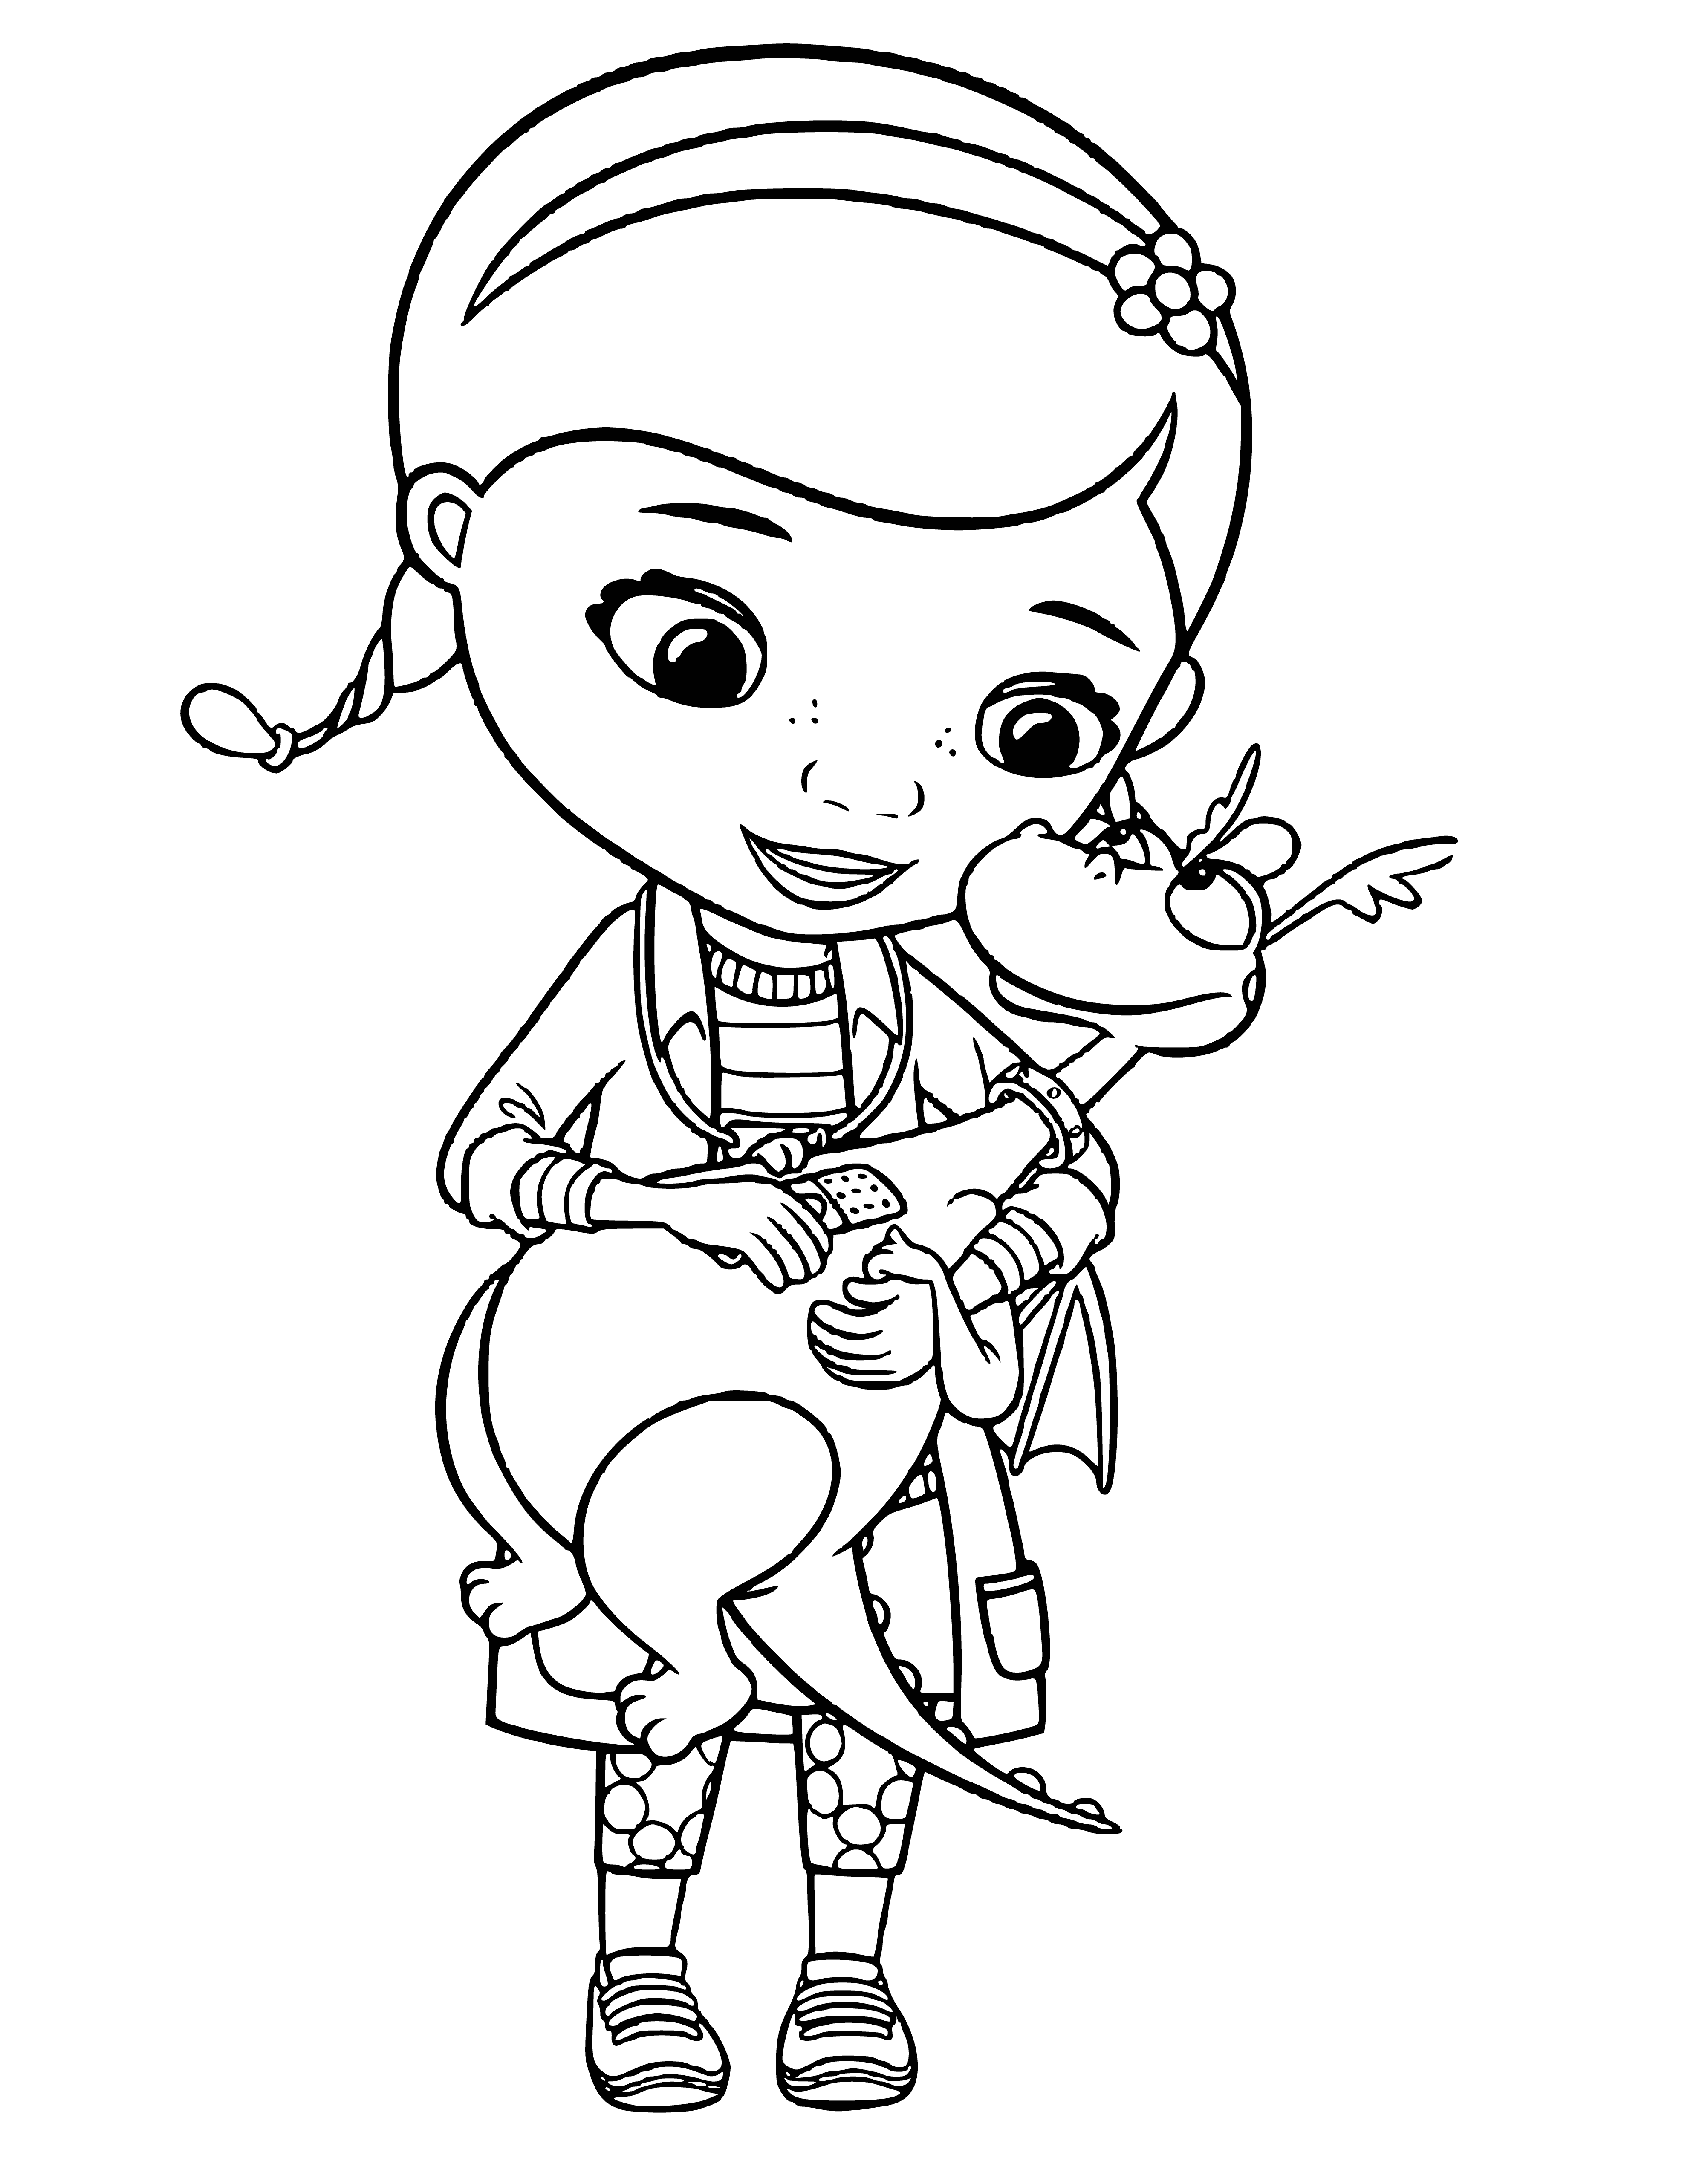 coloring page: Doc McStuffins stars Dotti & Staffi, her cheerful best friend, whose ginger scarves bring cheer to the pages. #adventure #friendship #joy